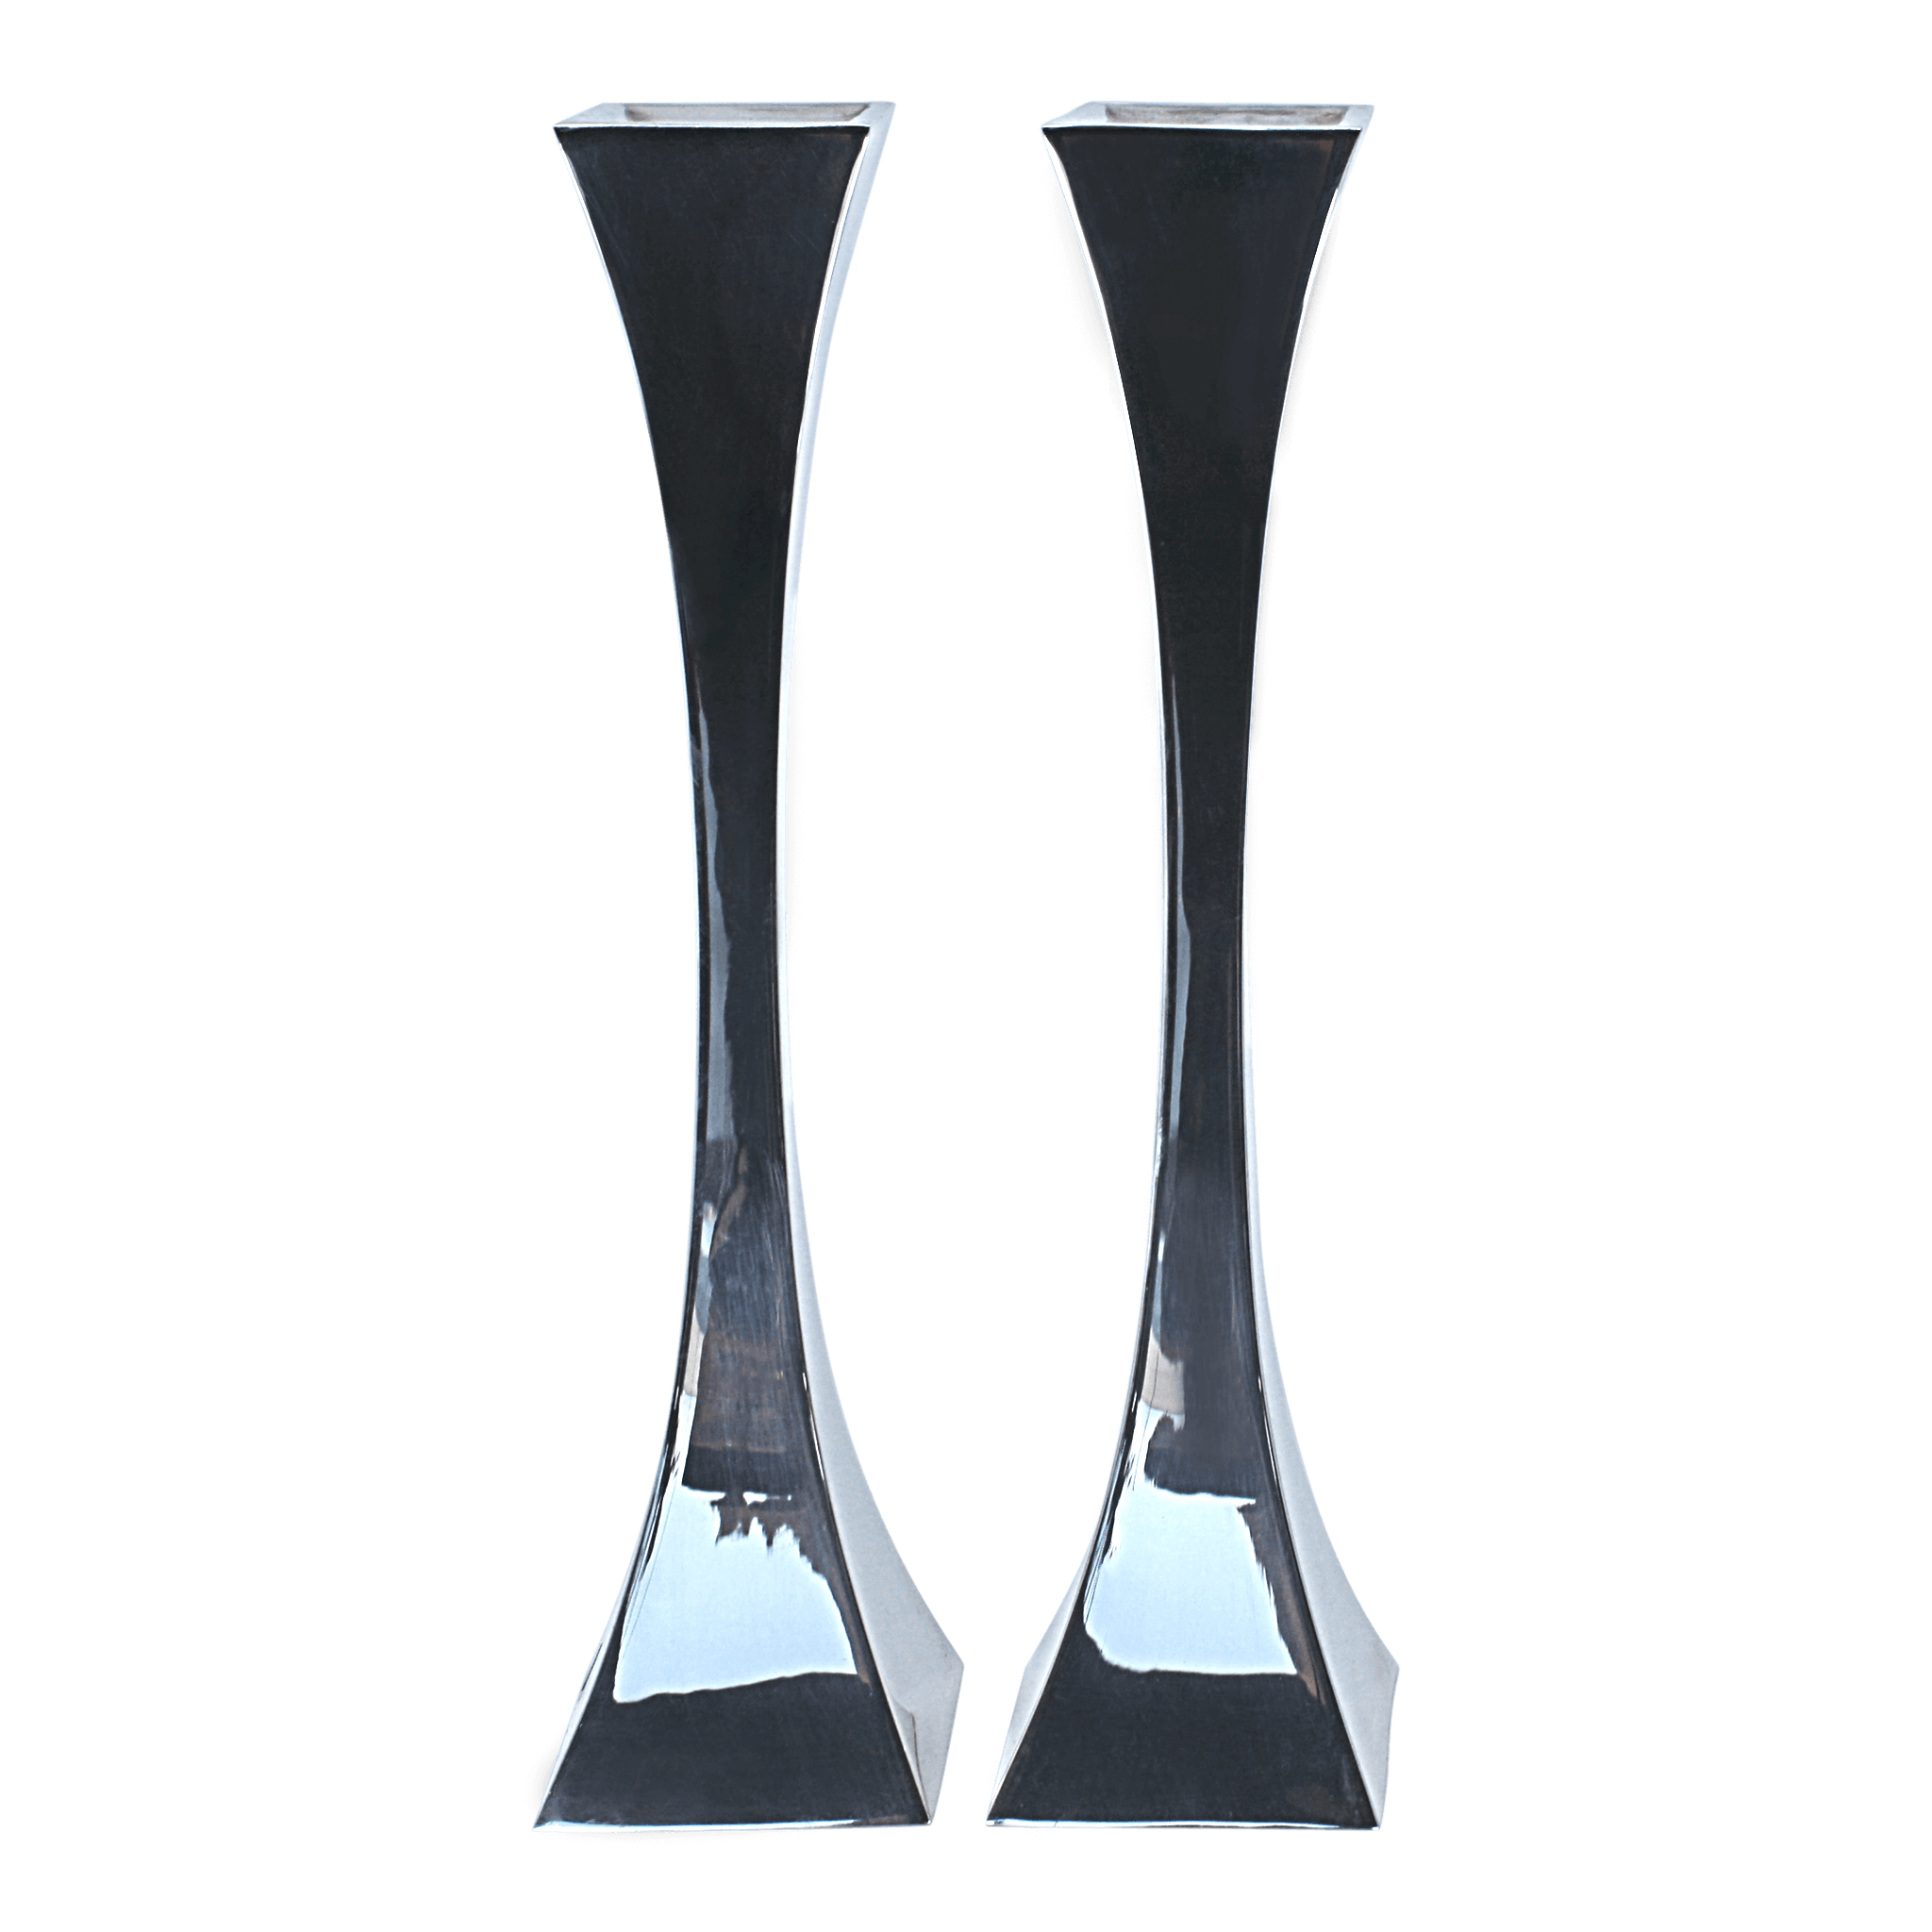 Squared Hourglass Shabbat Candlesticks A - Piece By Zion Hadad